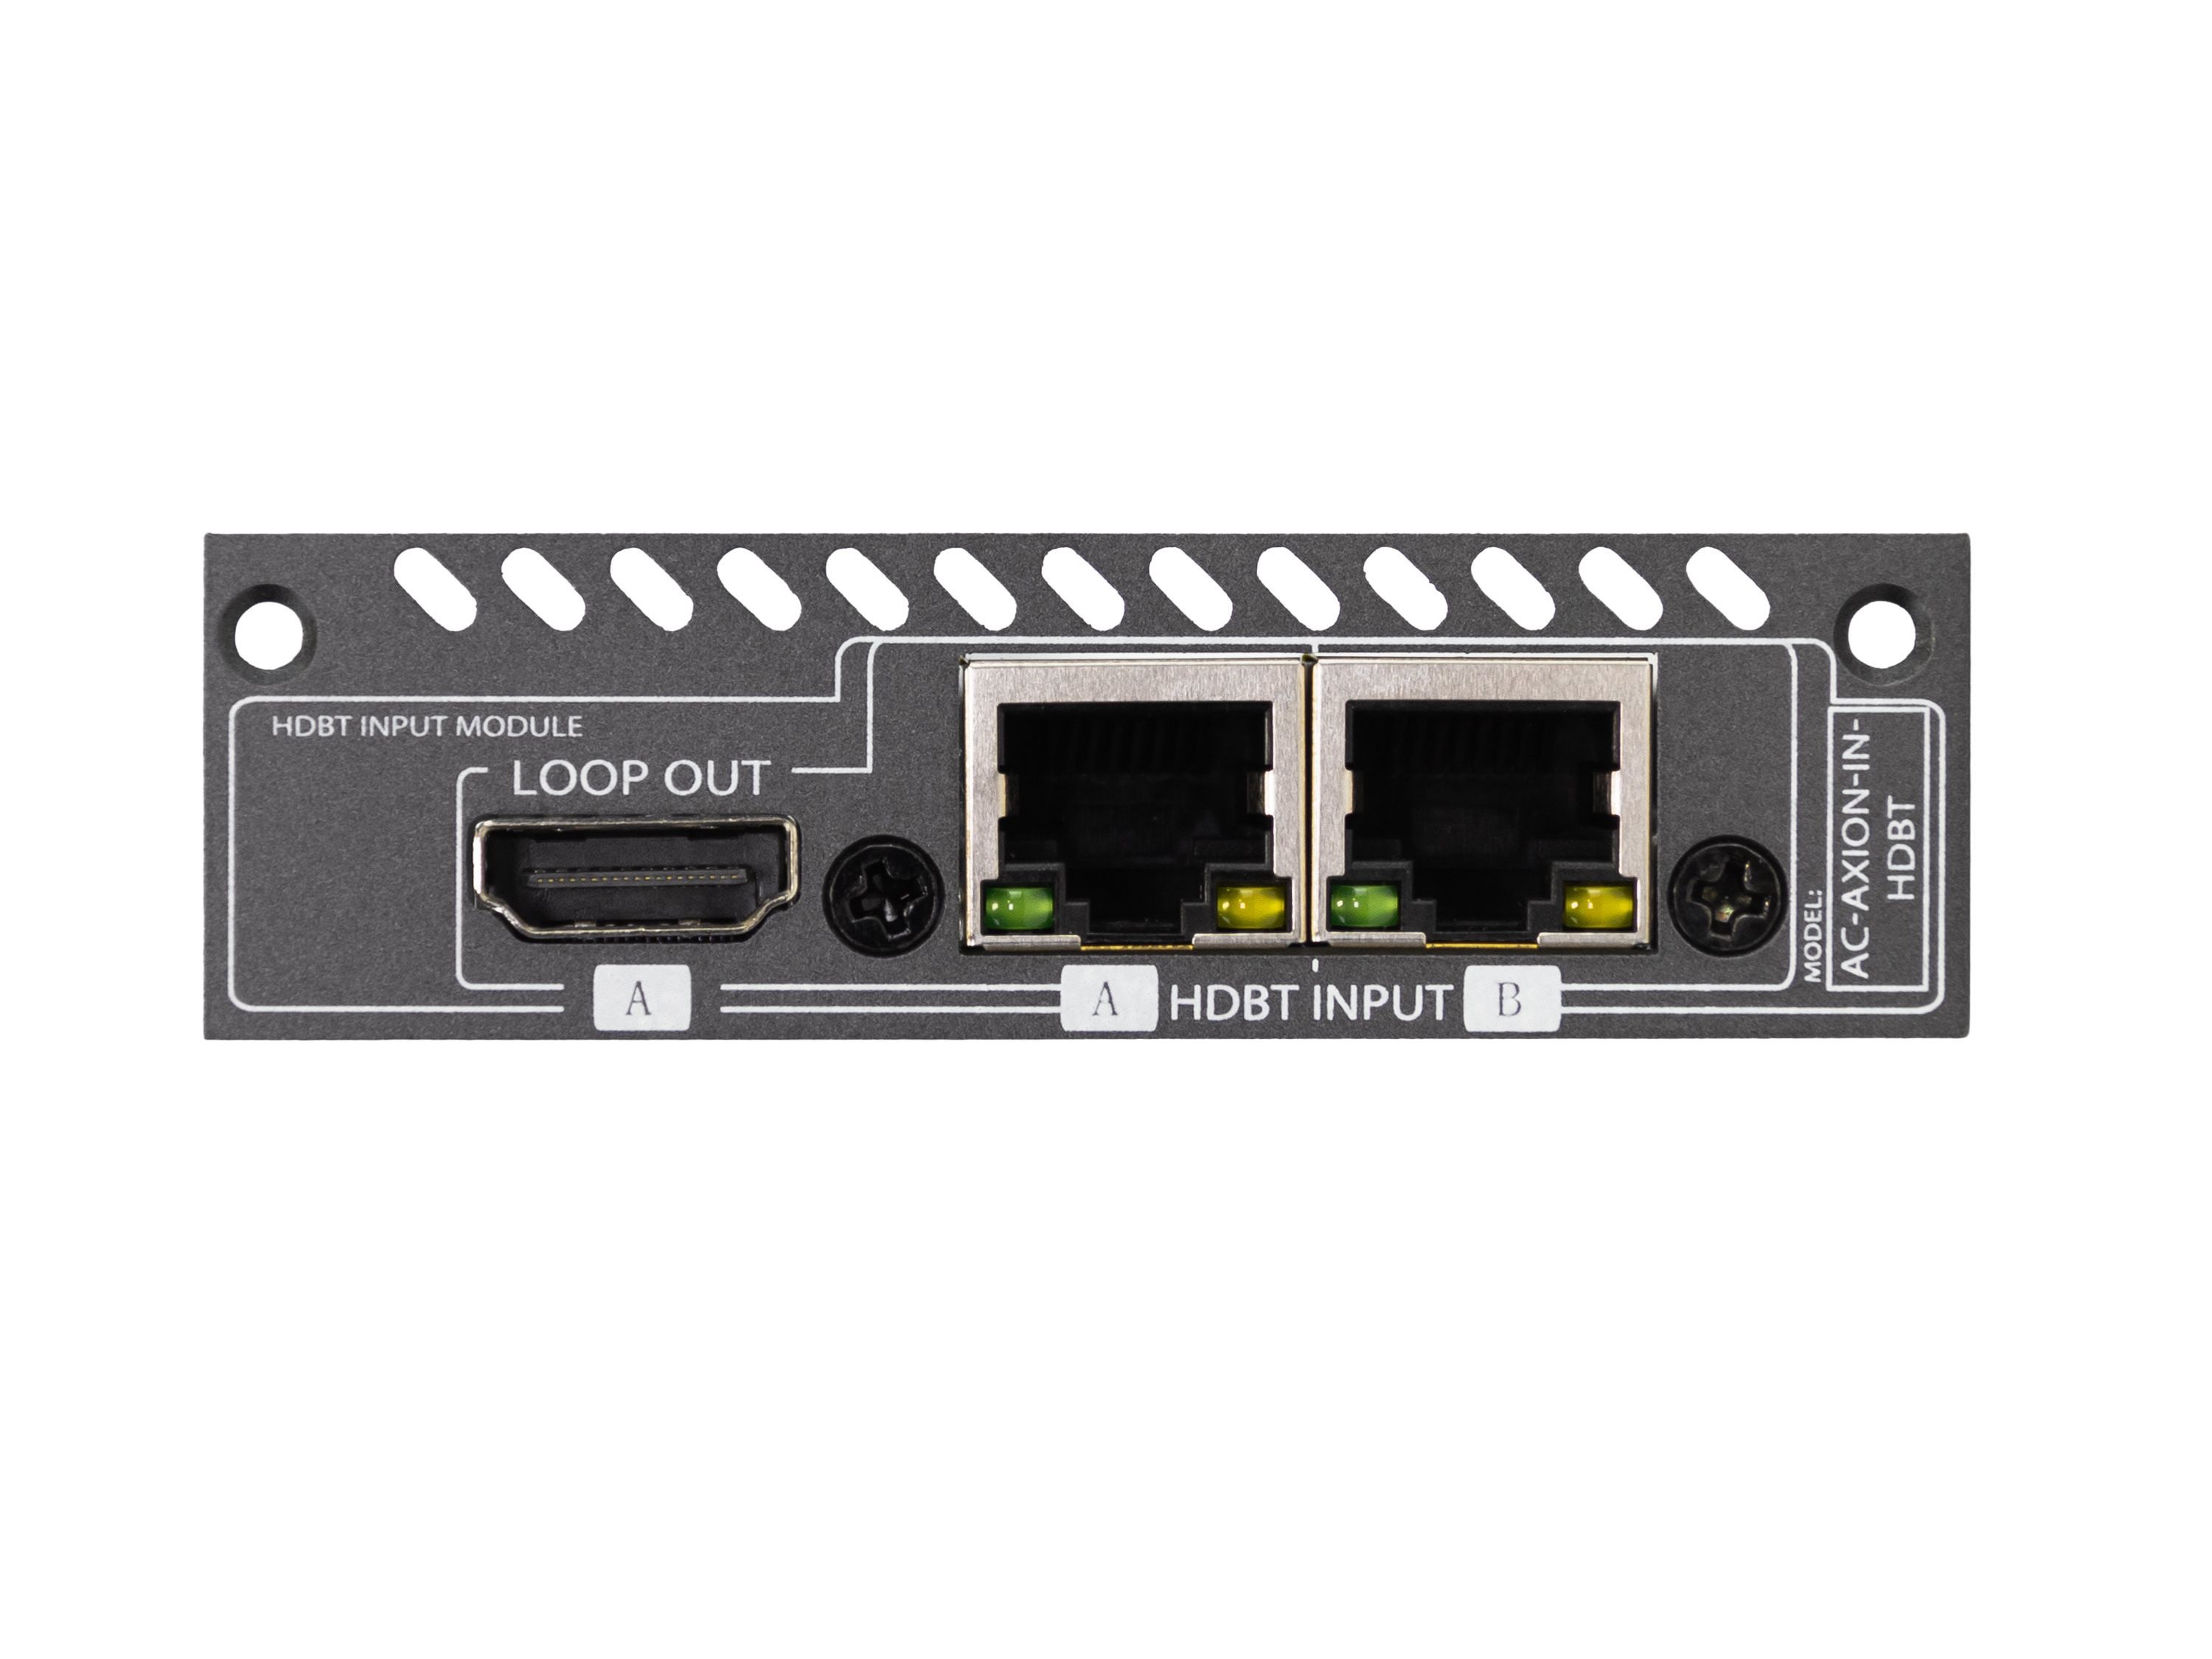 AC-AXION-IN-HDBT Dual 18Gbps ICT HDBT Input Ports with Single Mirrored HDMI Port Card by AVPro Edge